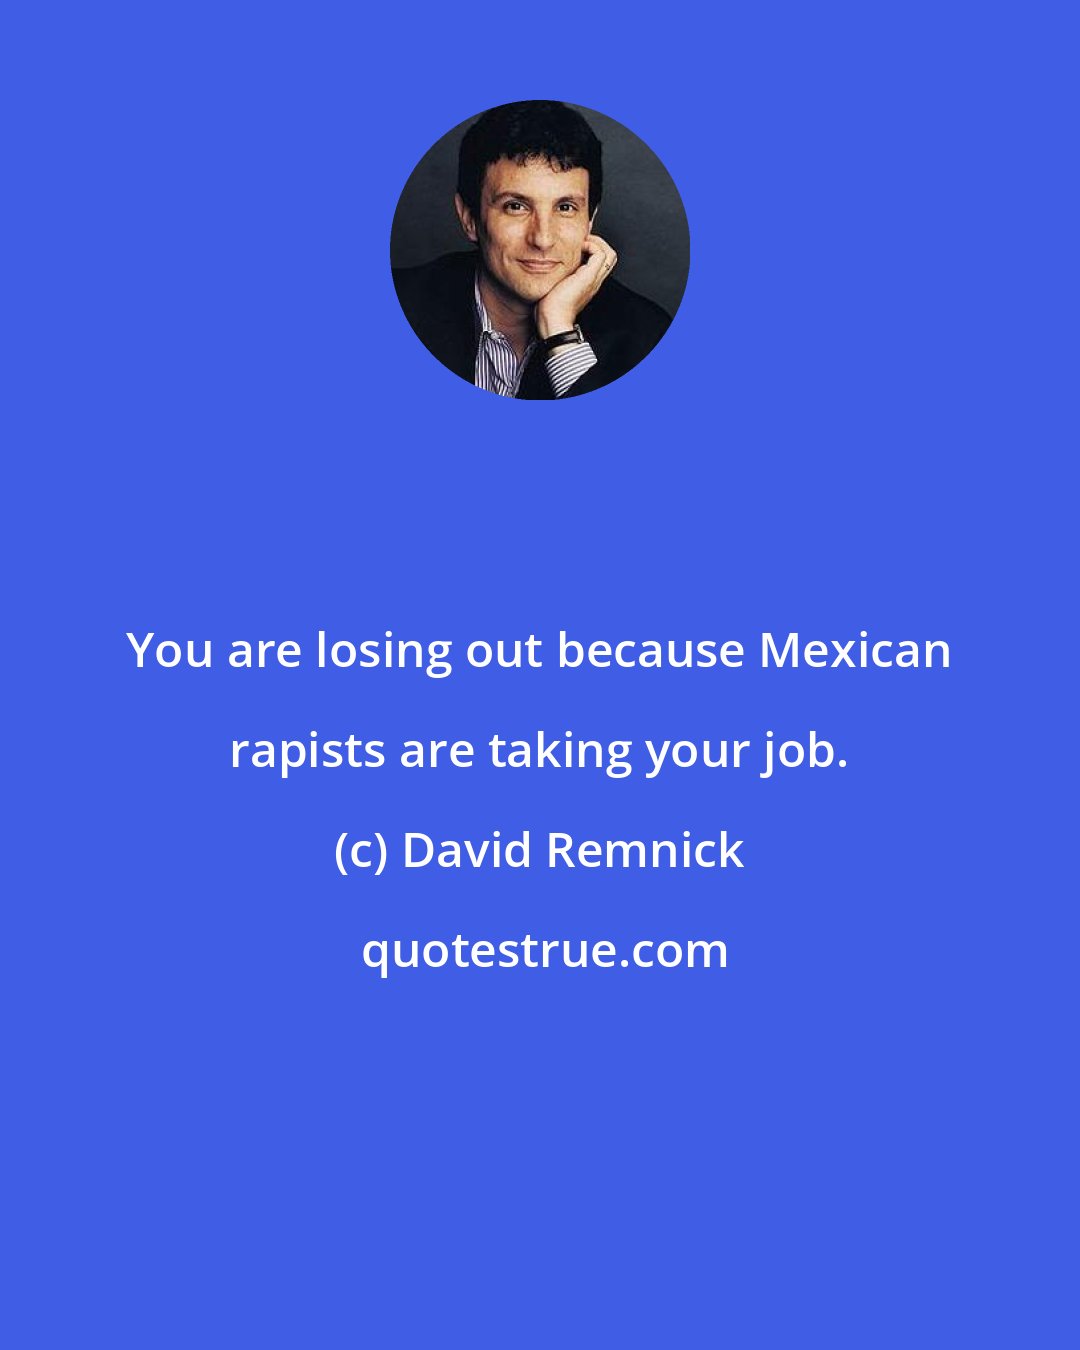 David Remnick: You are losing out because Mexican rapists are taking your job.